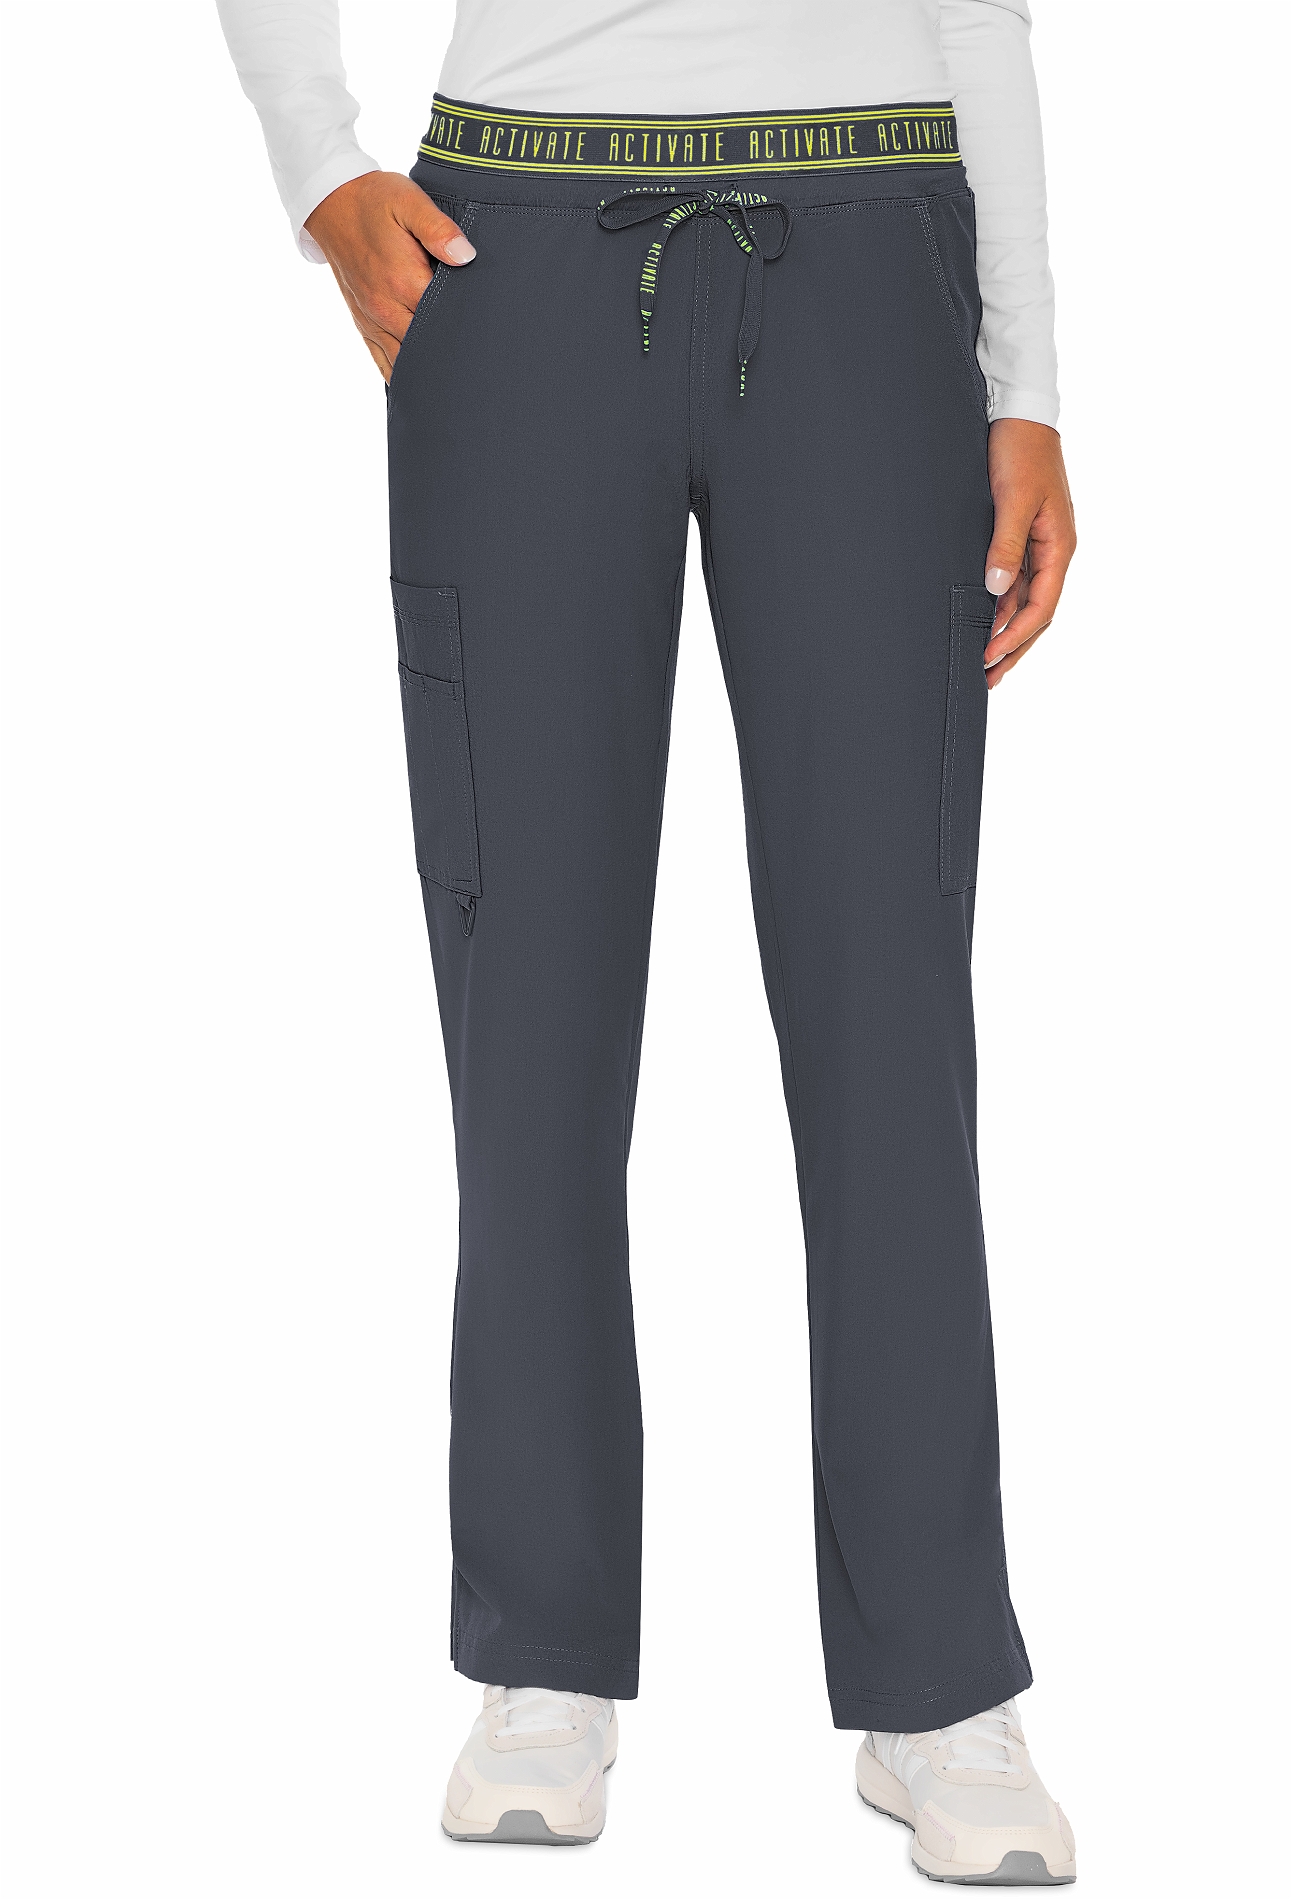 8747T Tall Med Couture Activate 4-way Energy Stretch Yoga Straight Leg  Cargo Pant 